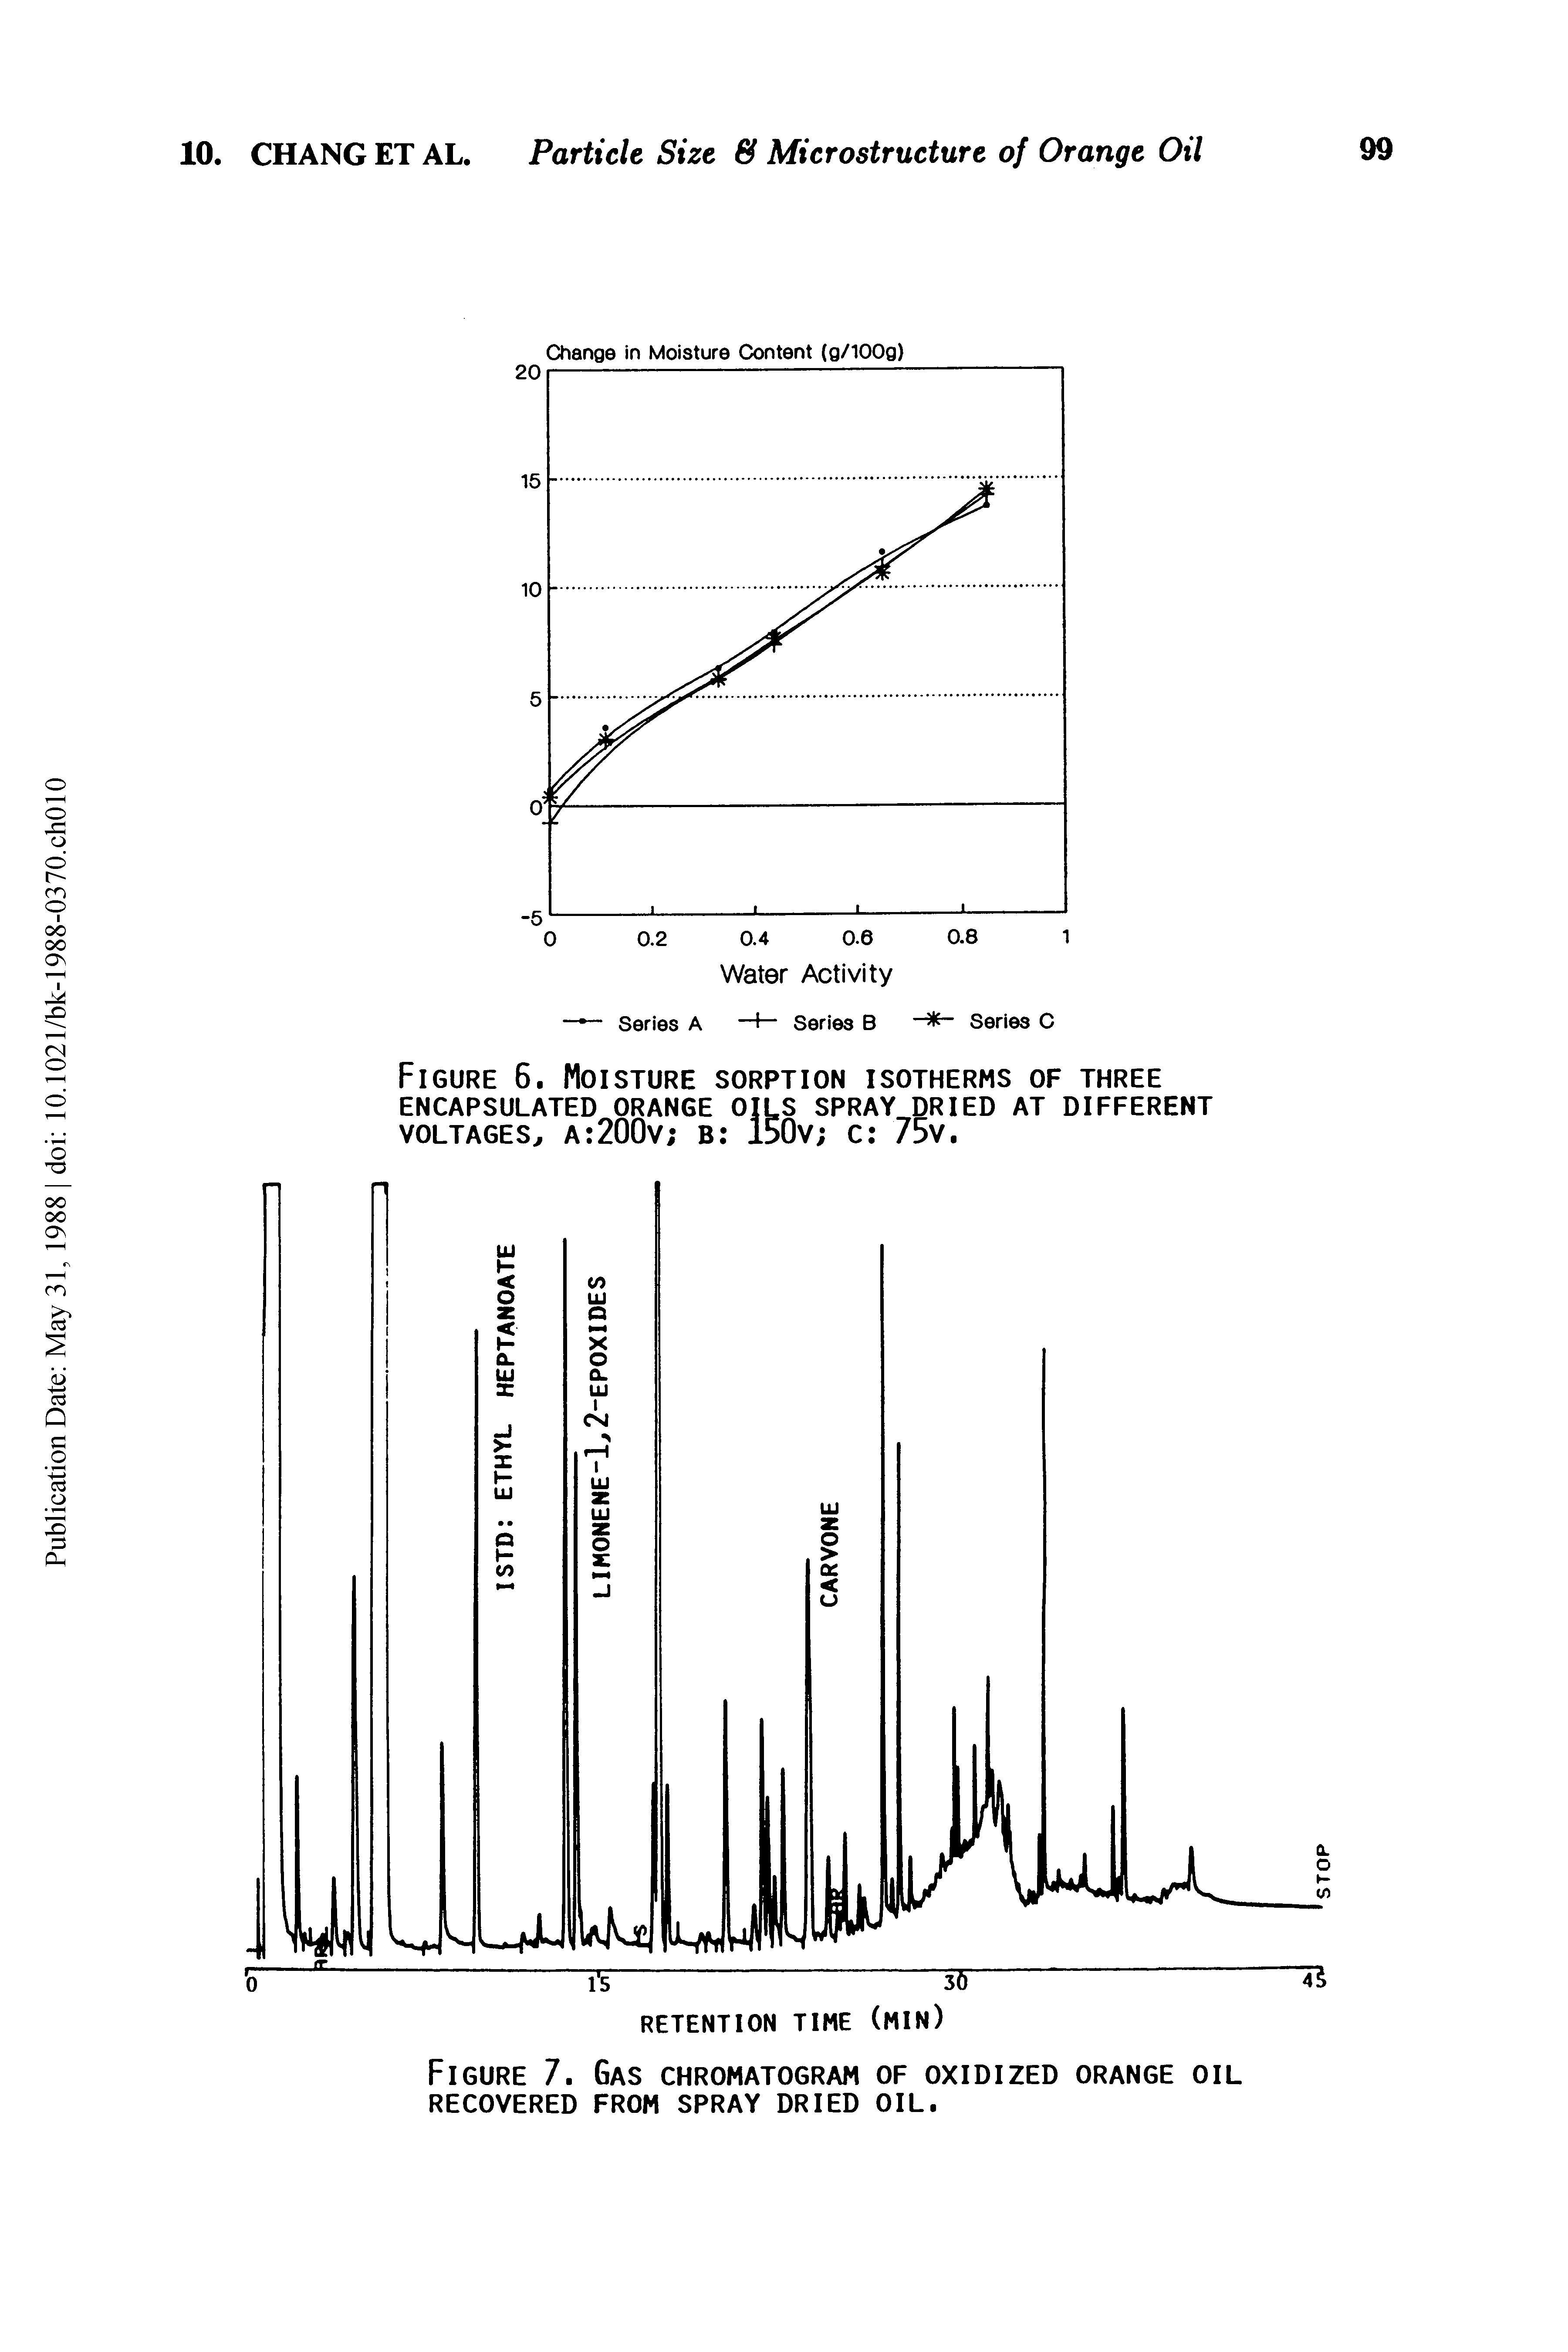 Figure 6. Moisture sorption isotherms of three ENCAPSULATED ORANGE OILS SPRAY DRIED AT DIFFERENT VOLTAGES a 200v b 150v c 75v.